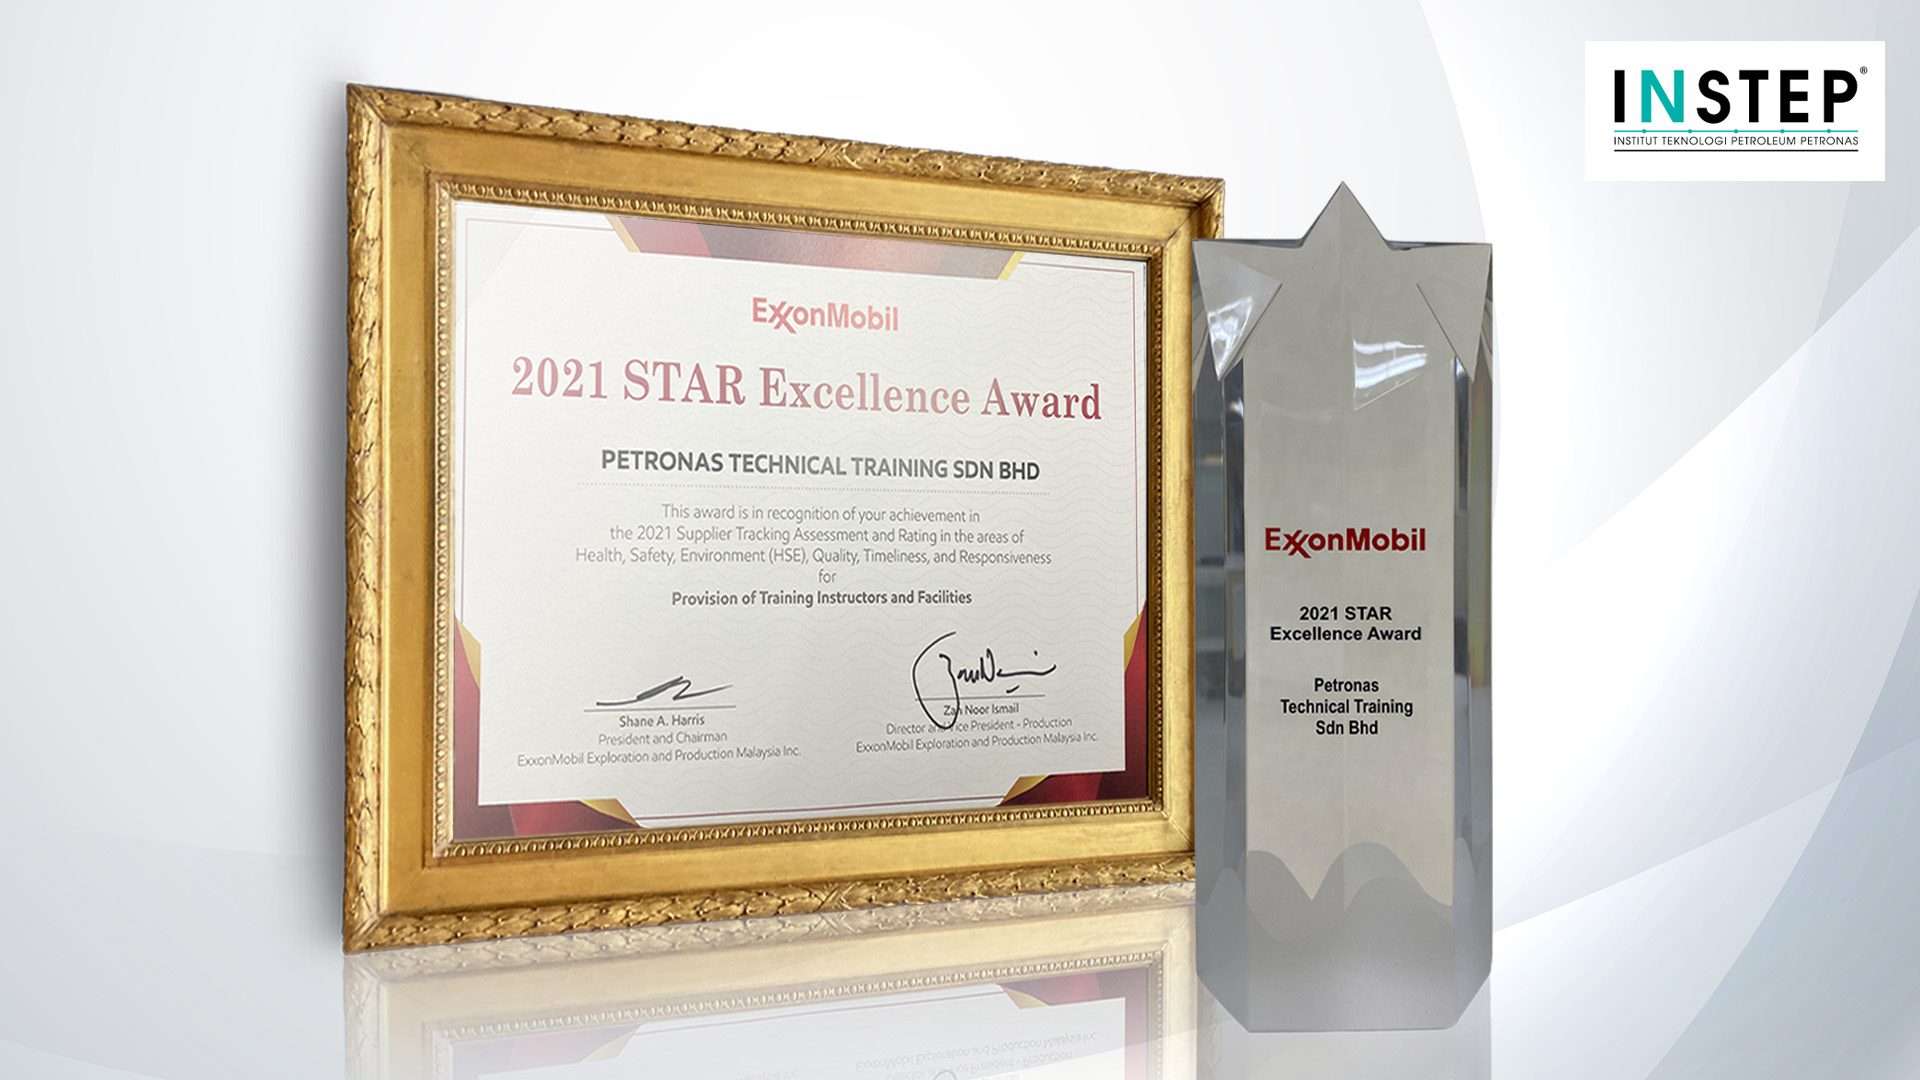 INSTEP Bags its First STAR Excellence Award 2021 from ExxonMobil